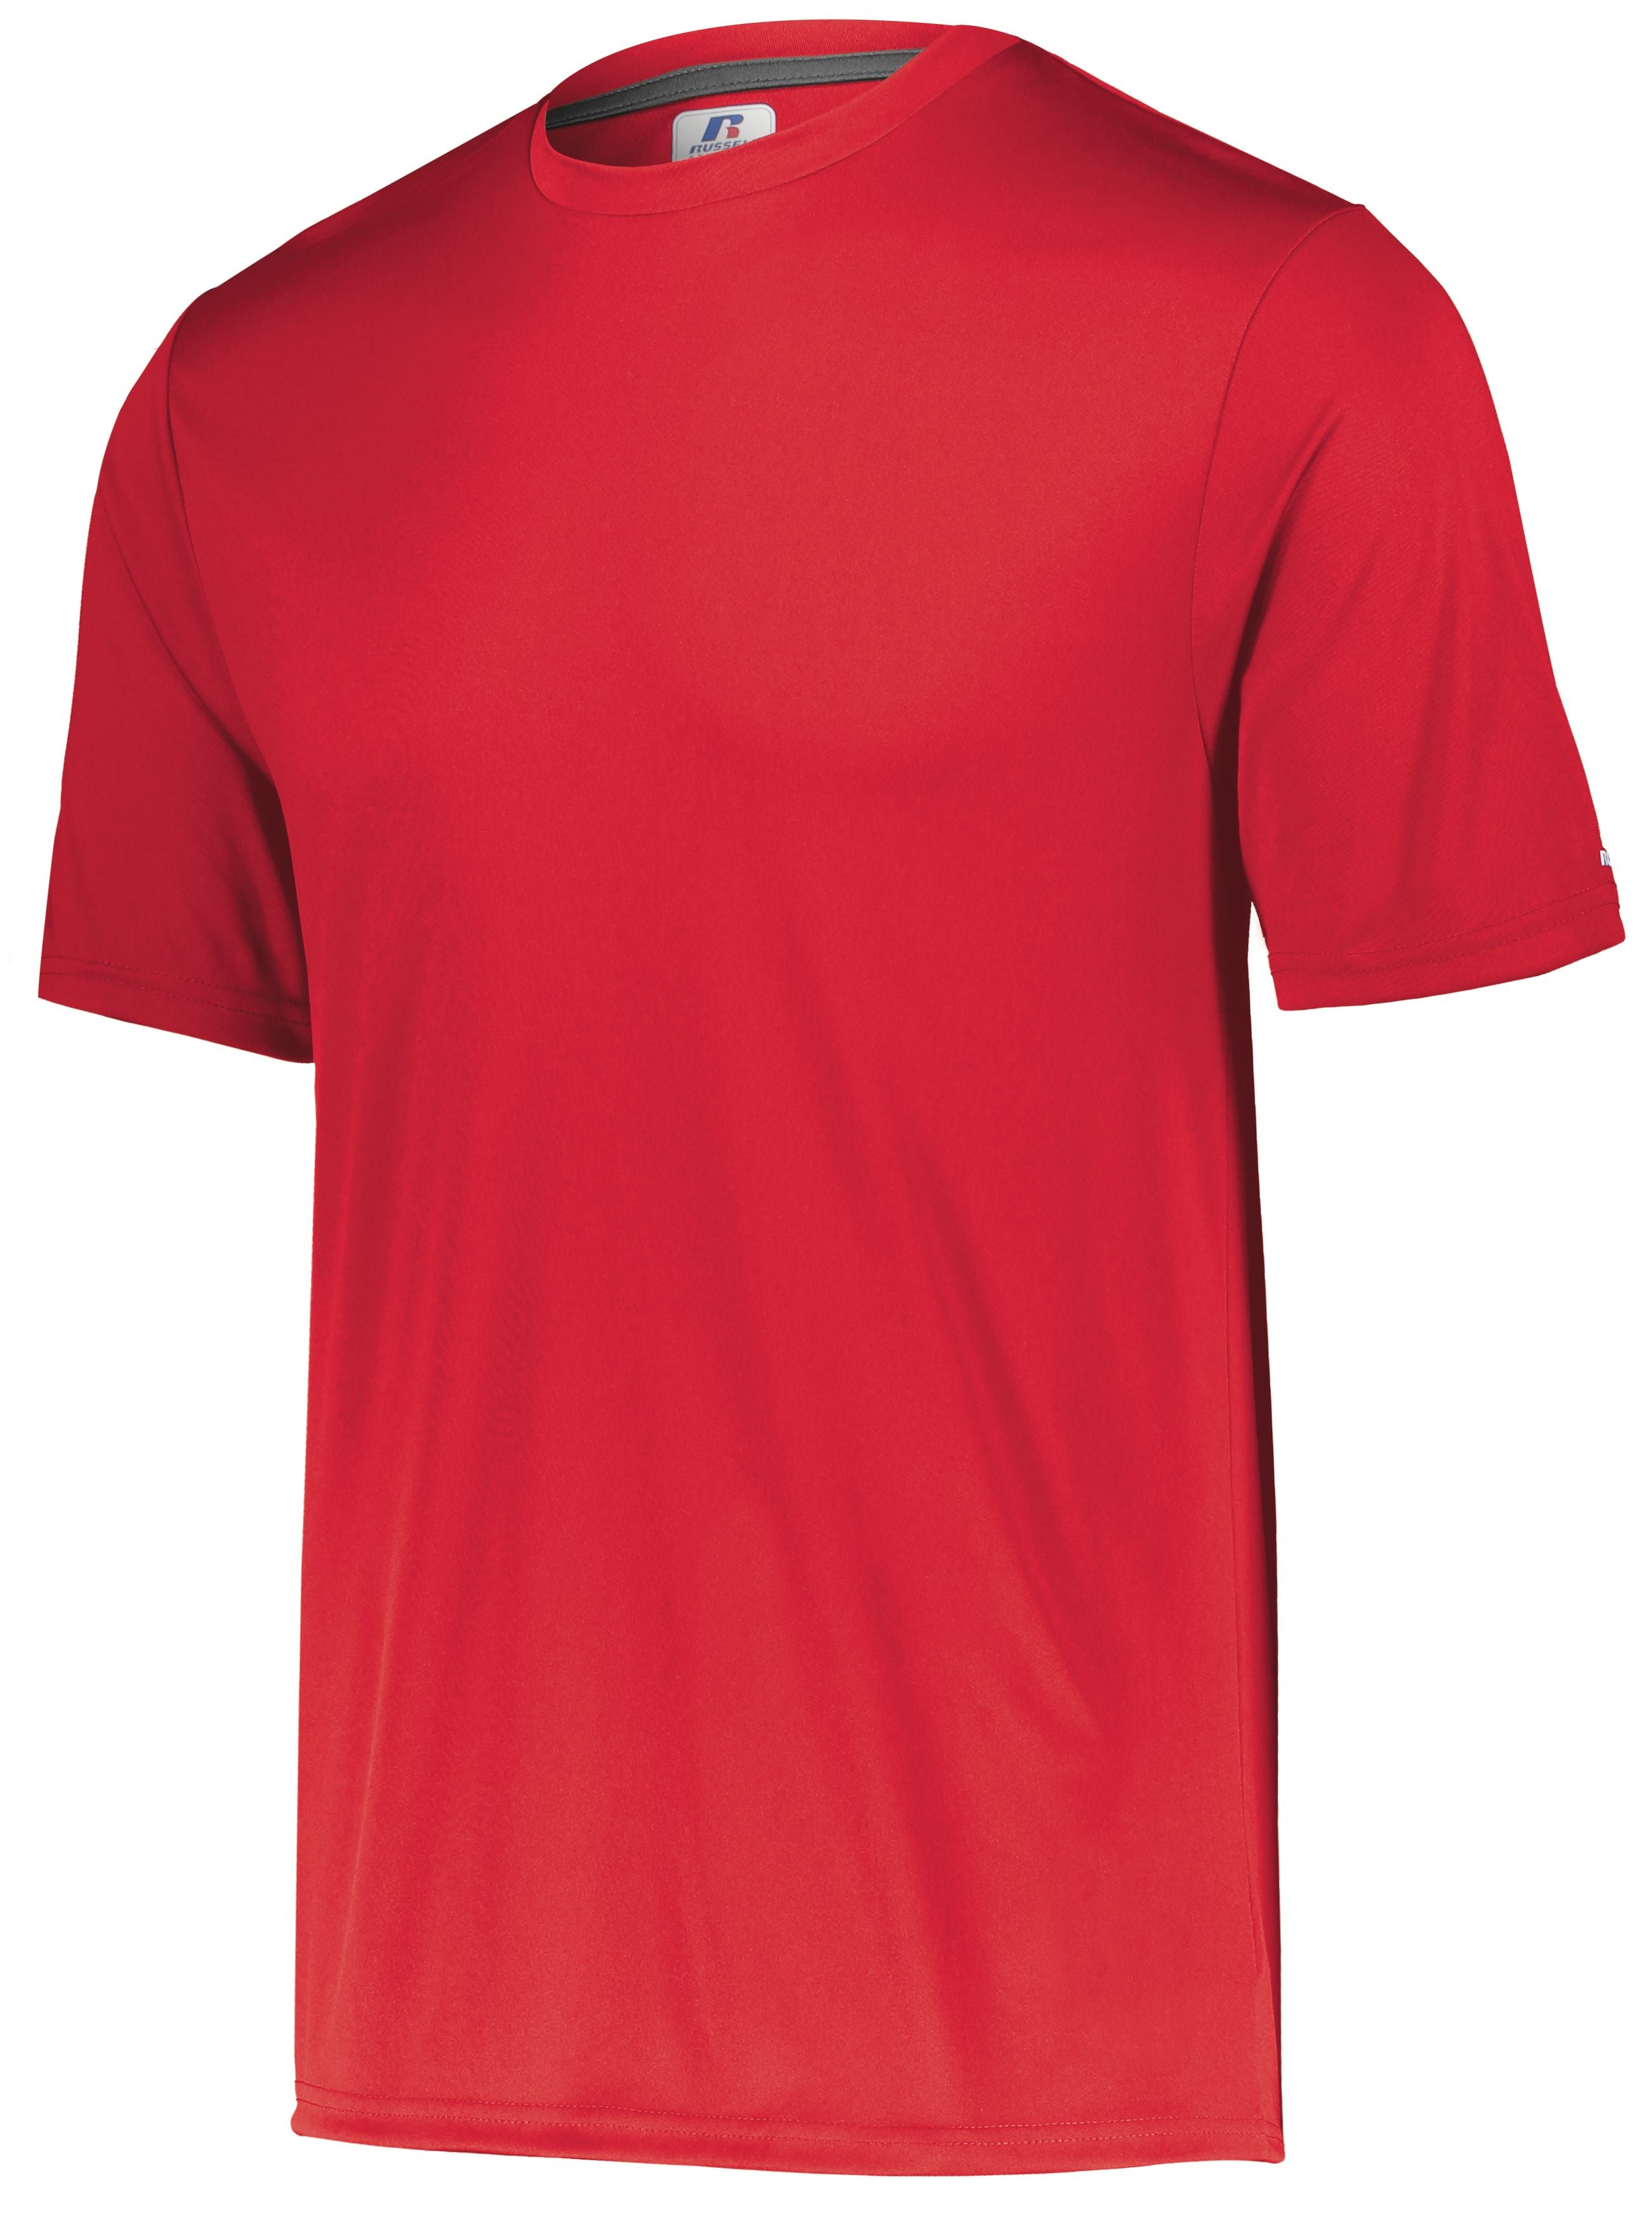 Russell Athletic Youth Dri-Power Core Performance Tee in True Red  -Part of the Youth, Youth-Tee-Shirt, T-Shirts, Russell-Athletic-Products, Shirts product lines at KanaleyCreations.com